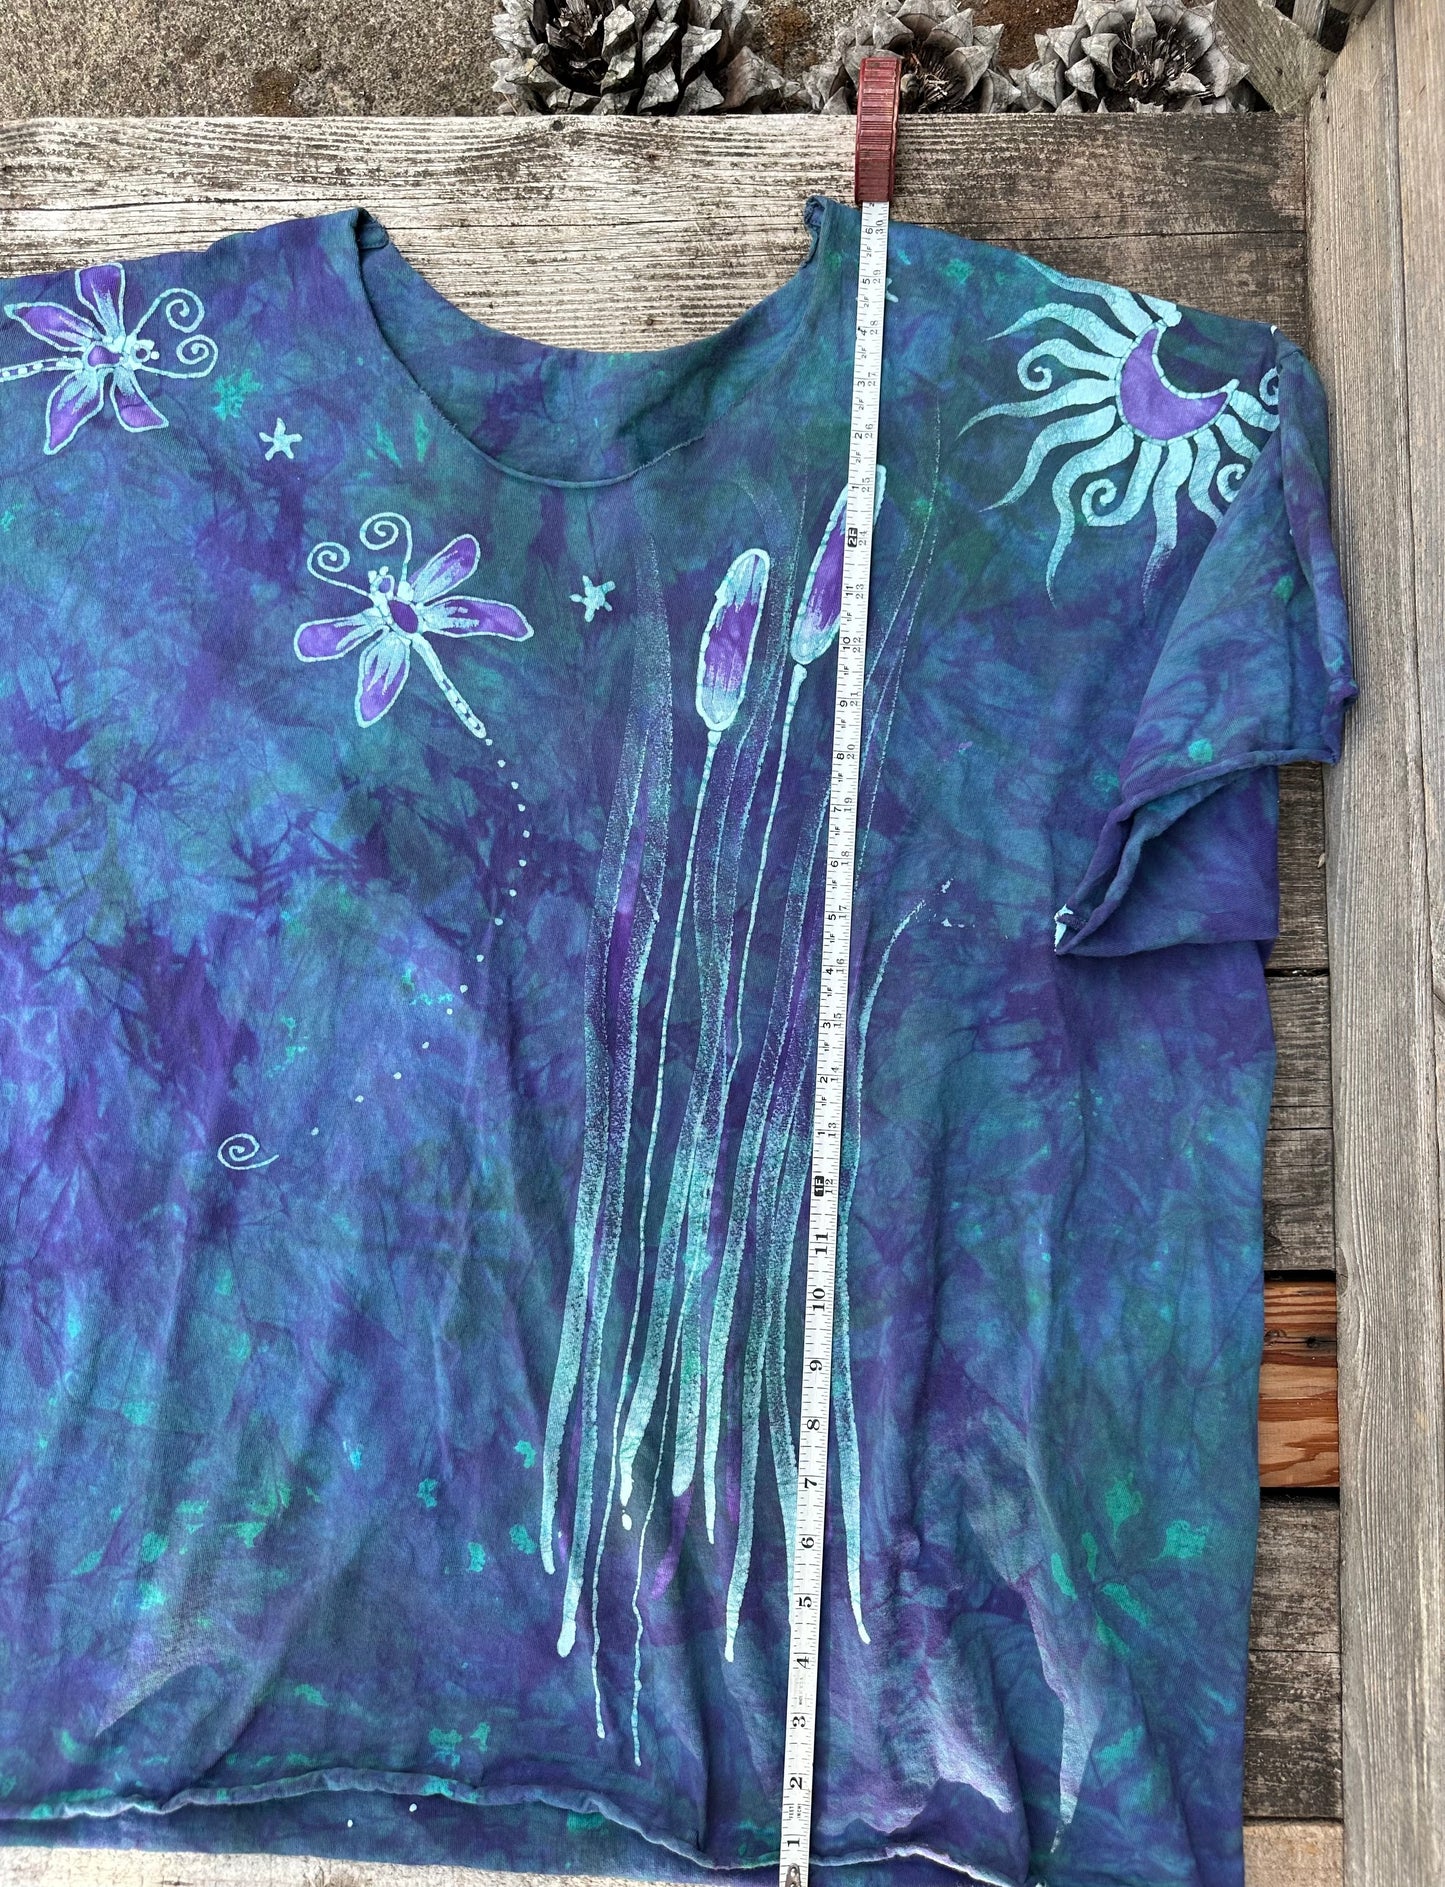 Dragonfly in Teal and Purple Cotton Cropped Crew Tee - Size 3X Shirts & Tops Batikwalla by Victoria 